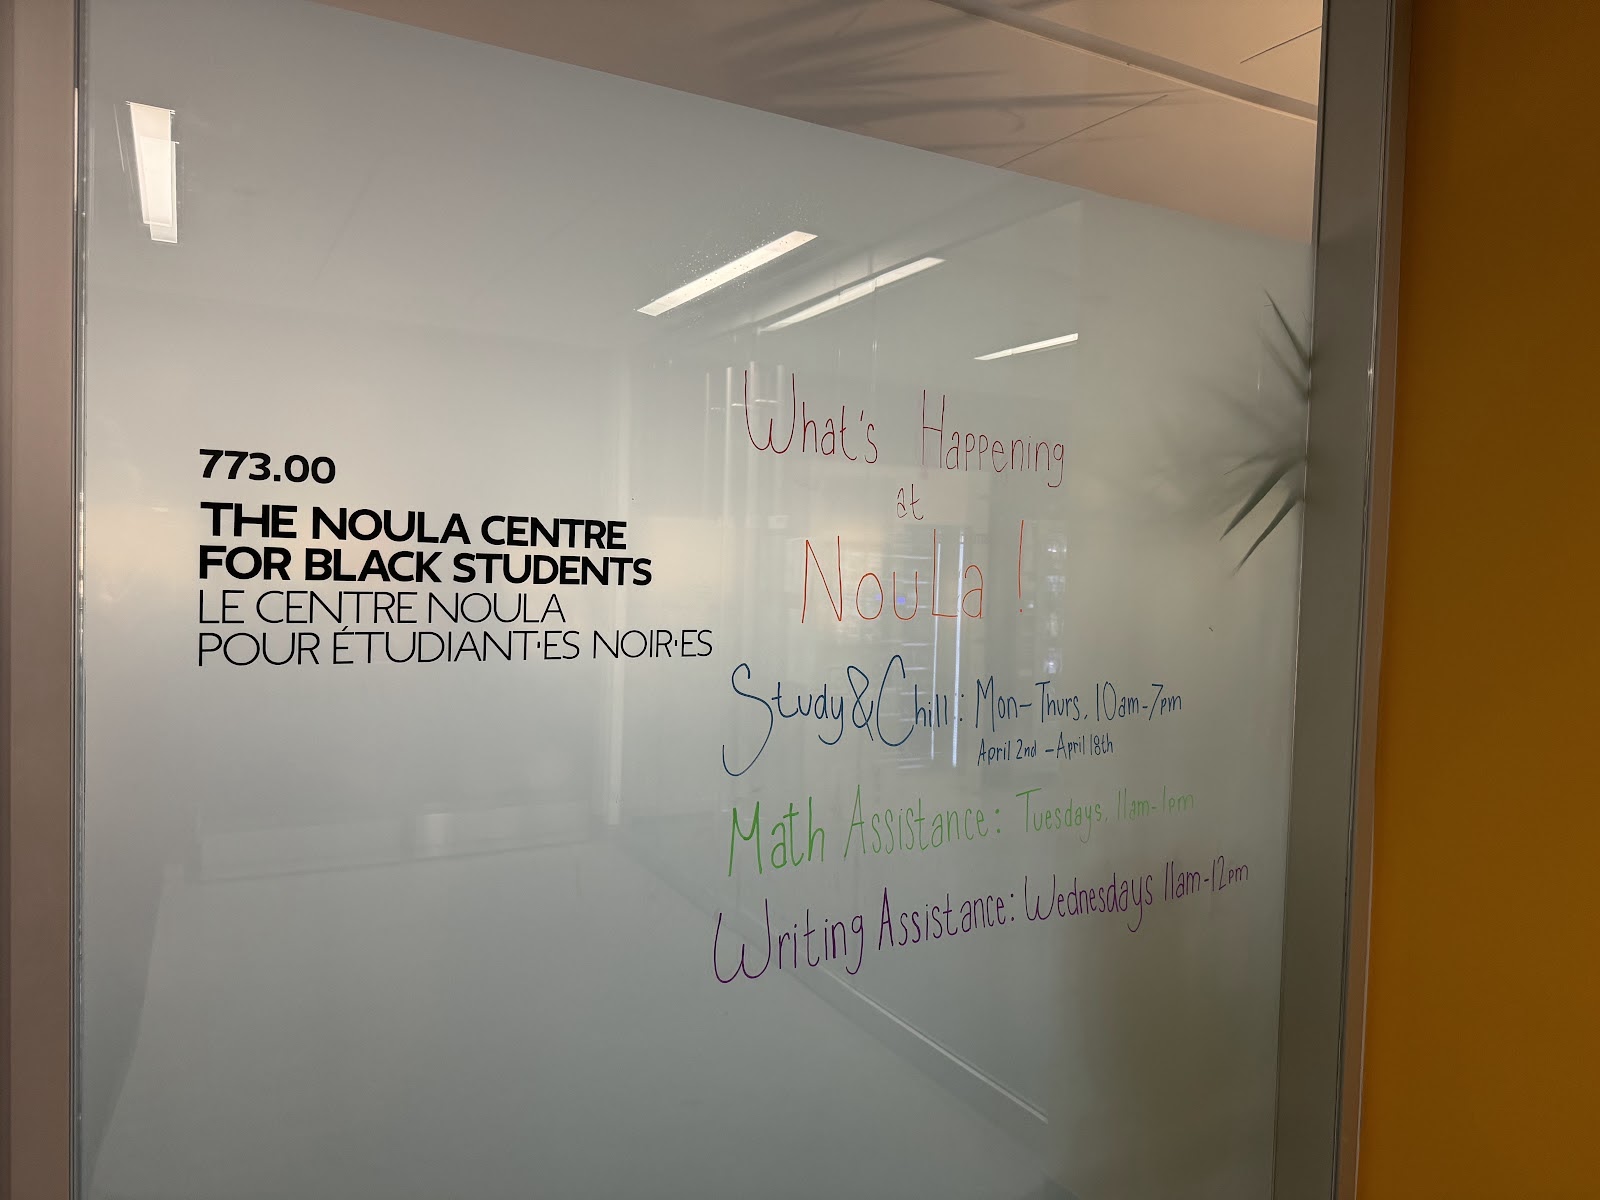 A frosted glass wall which says “773.00 THE NOULA CENTRE FOR BLACK STUDENTS”. There are also some events written in colourful markers.